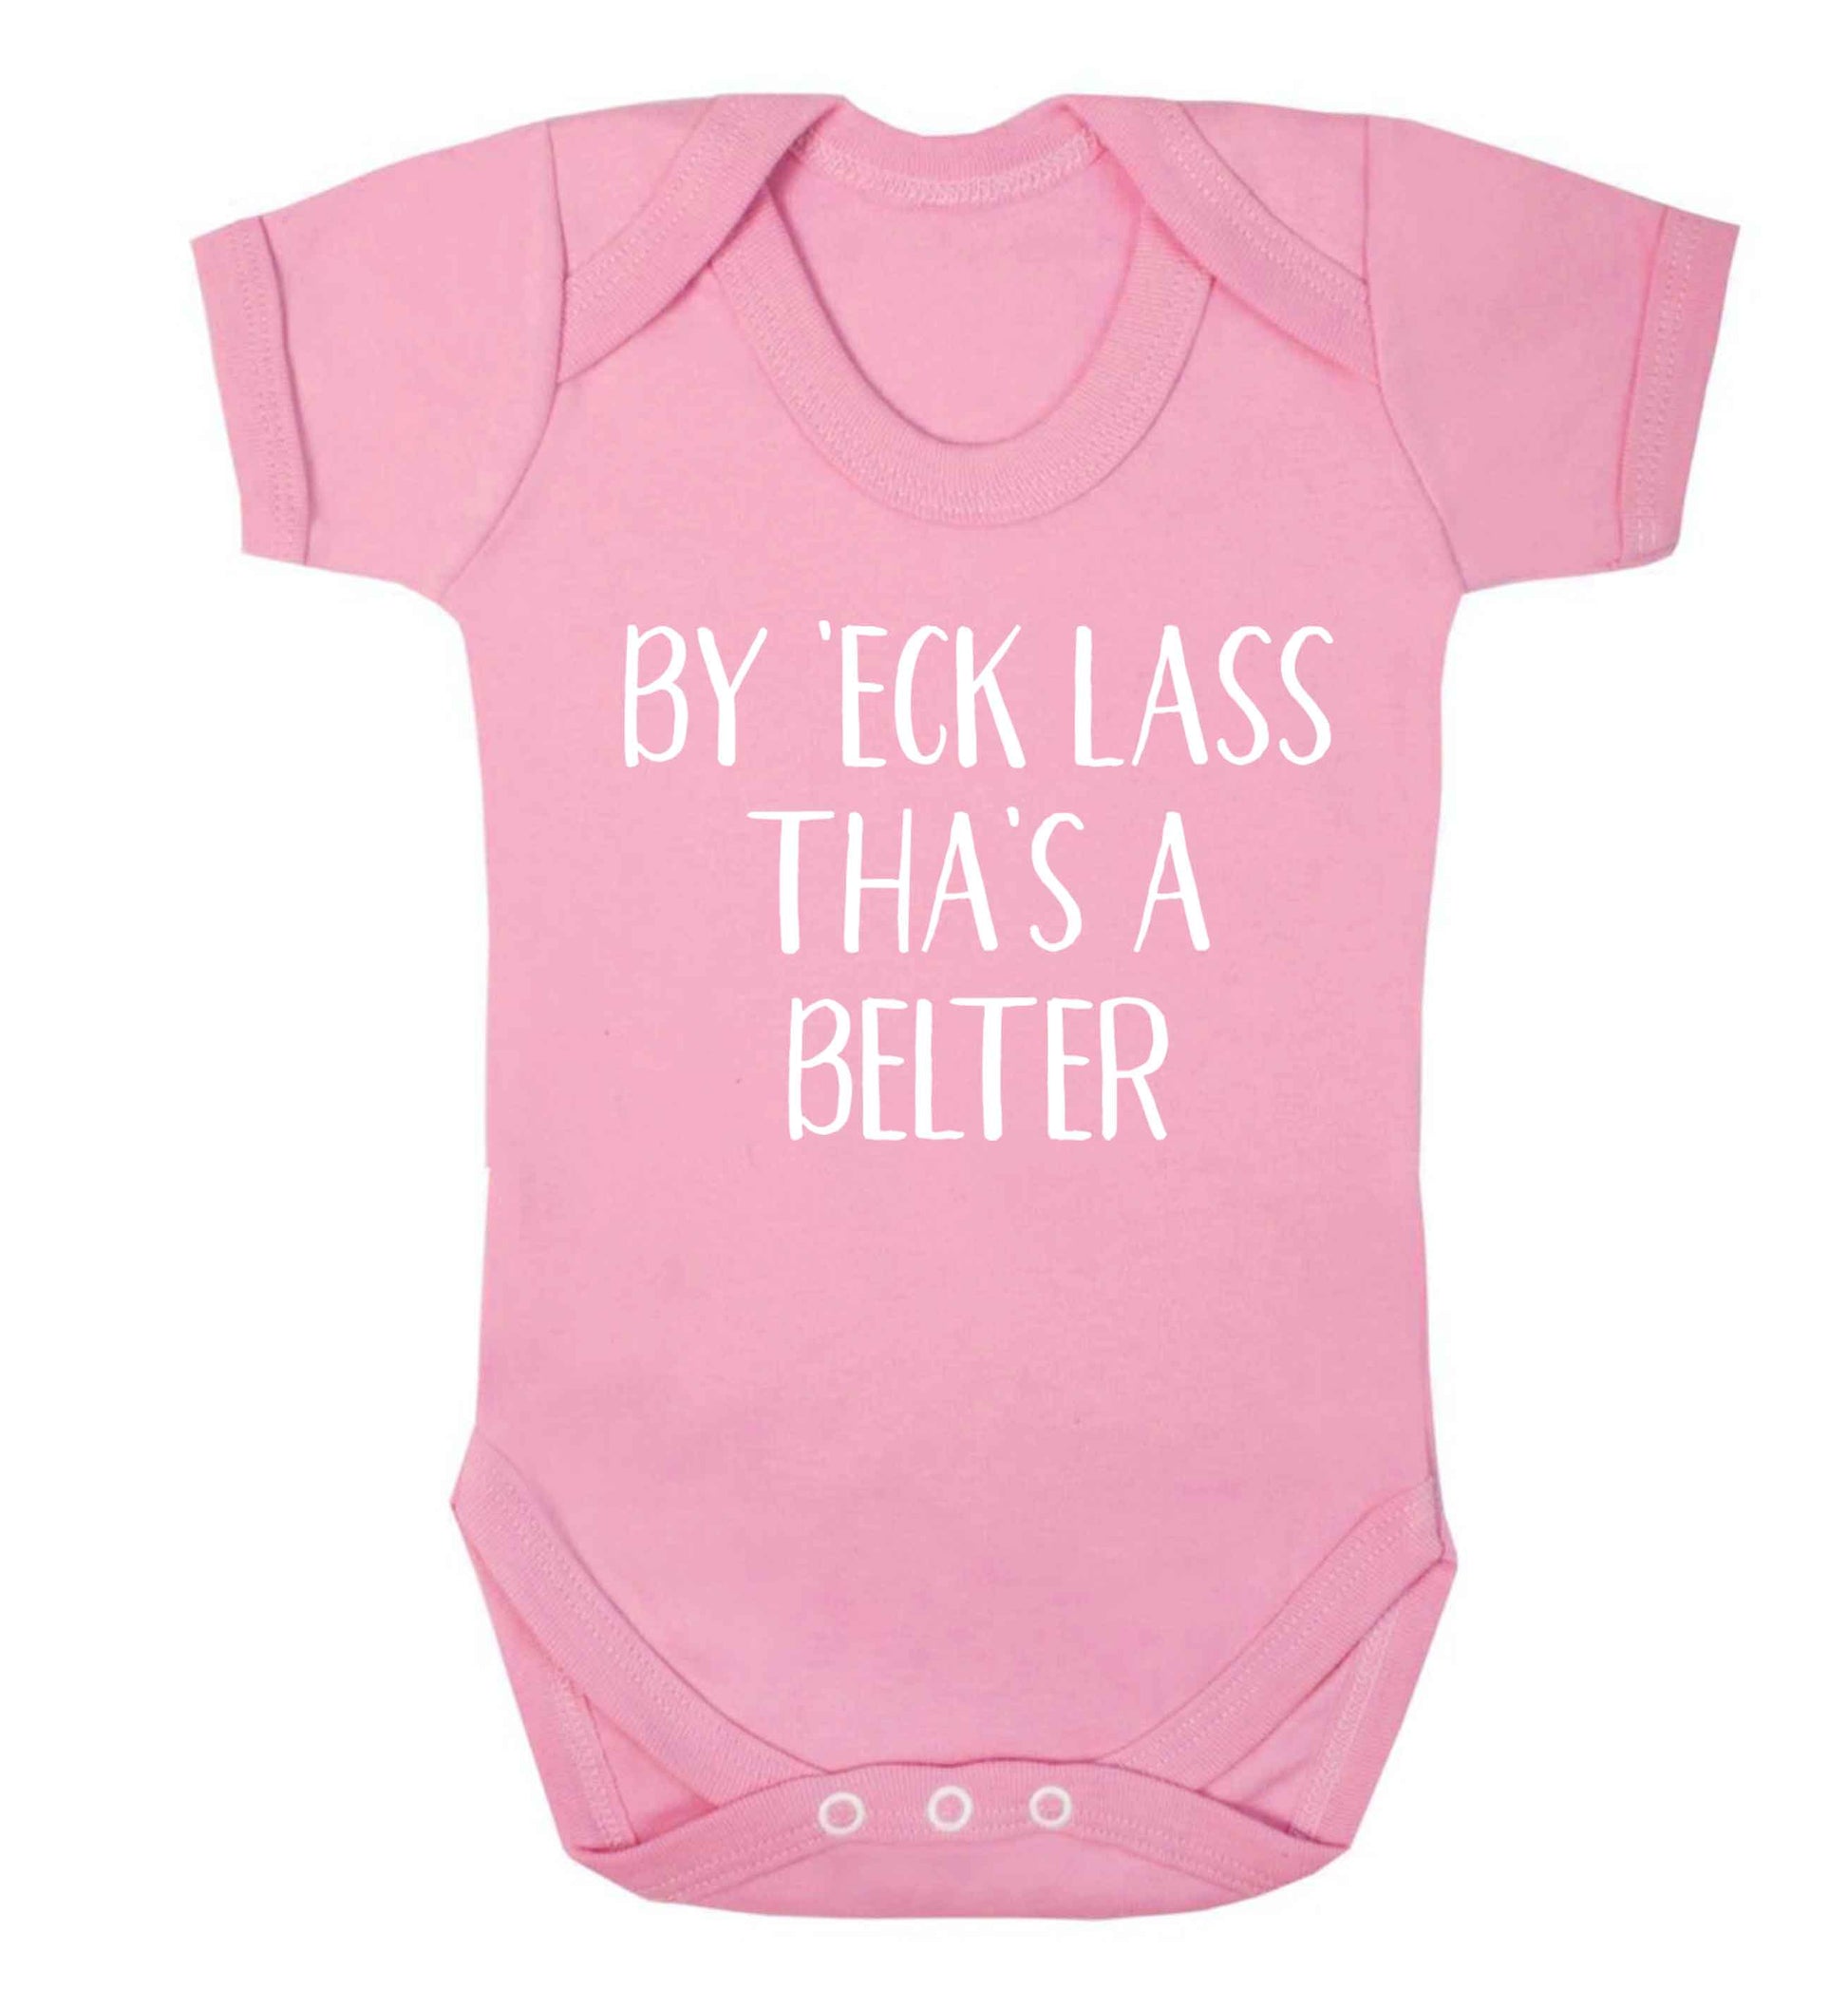 Be 'eck lass tha's a belter Baby Vest pale pink 18-24 months